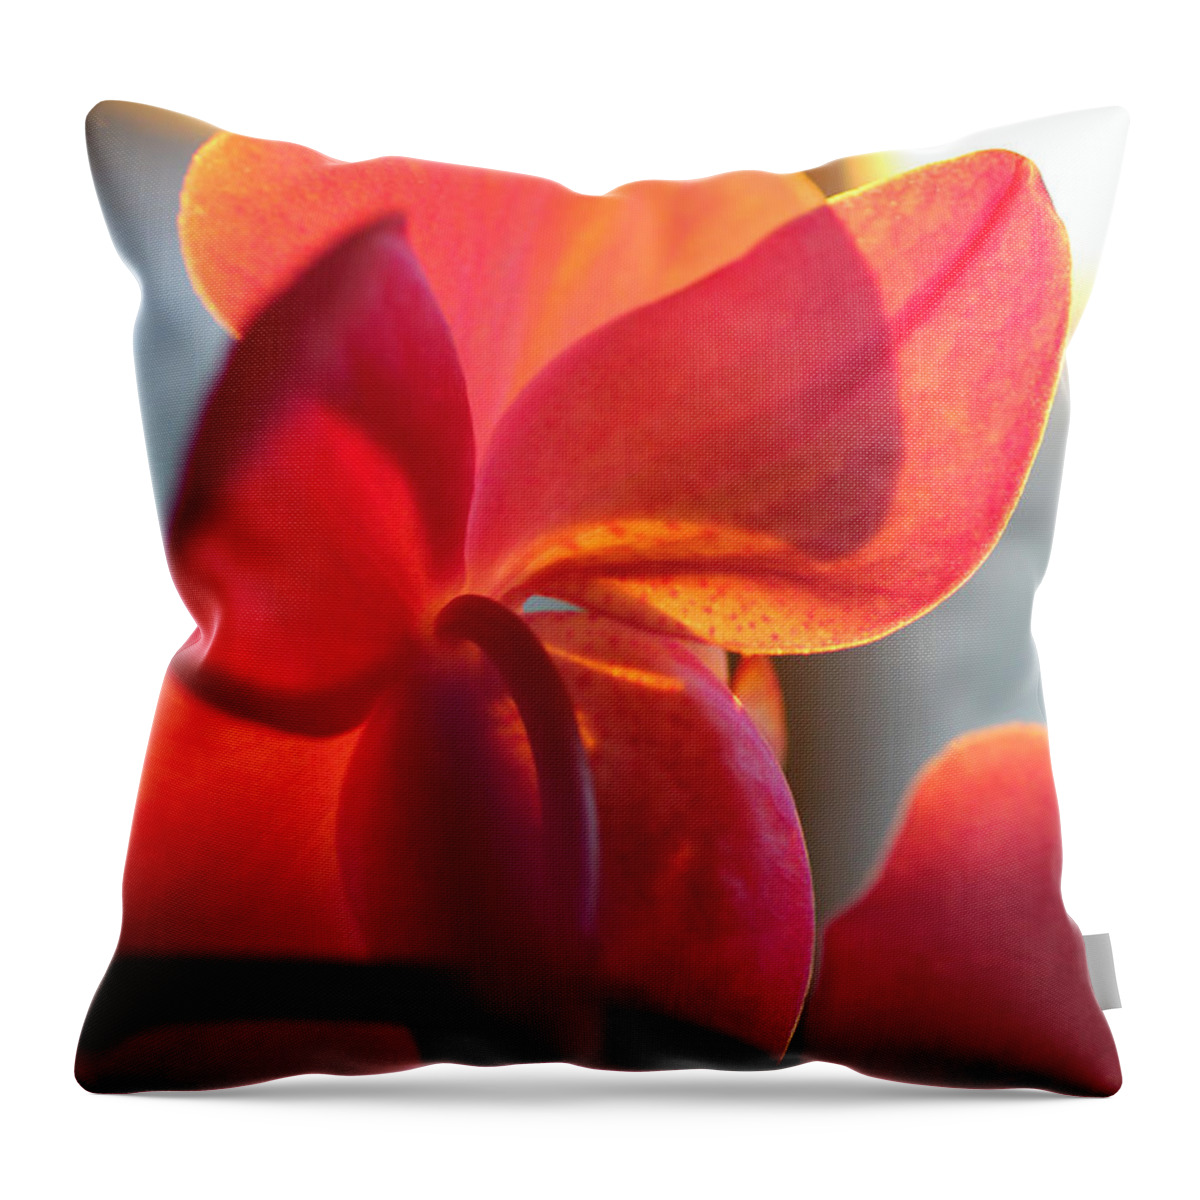 Spring Throw Pillow featuring the photograph Sunset On An Orchid by Jennifer Churchman